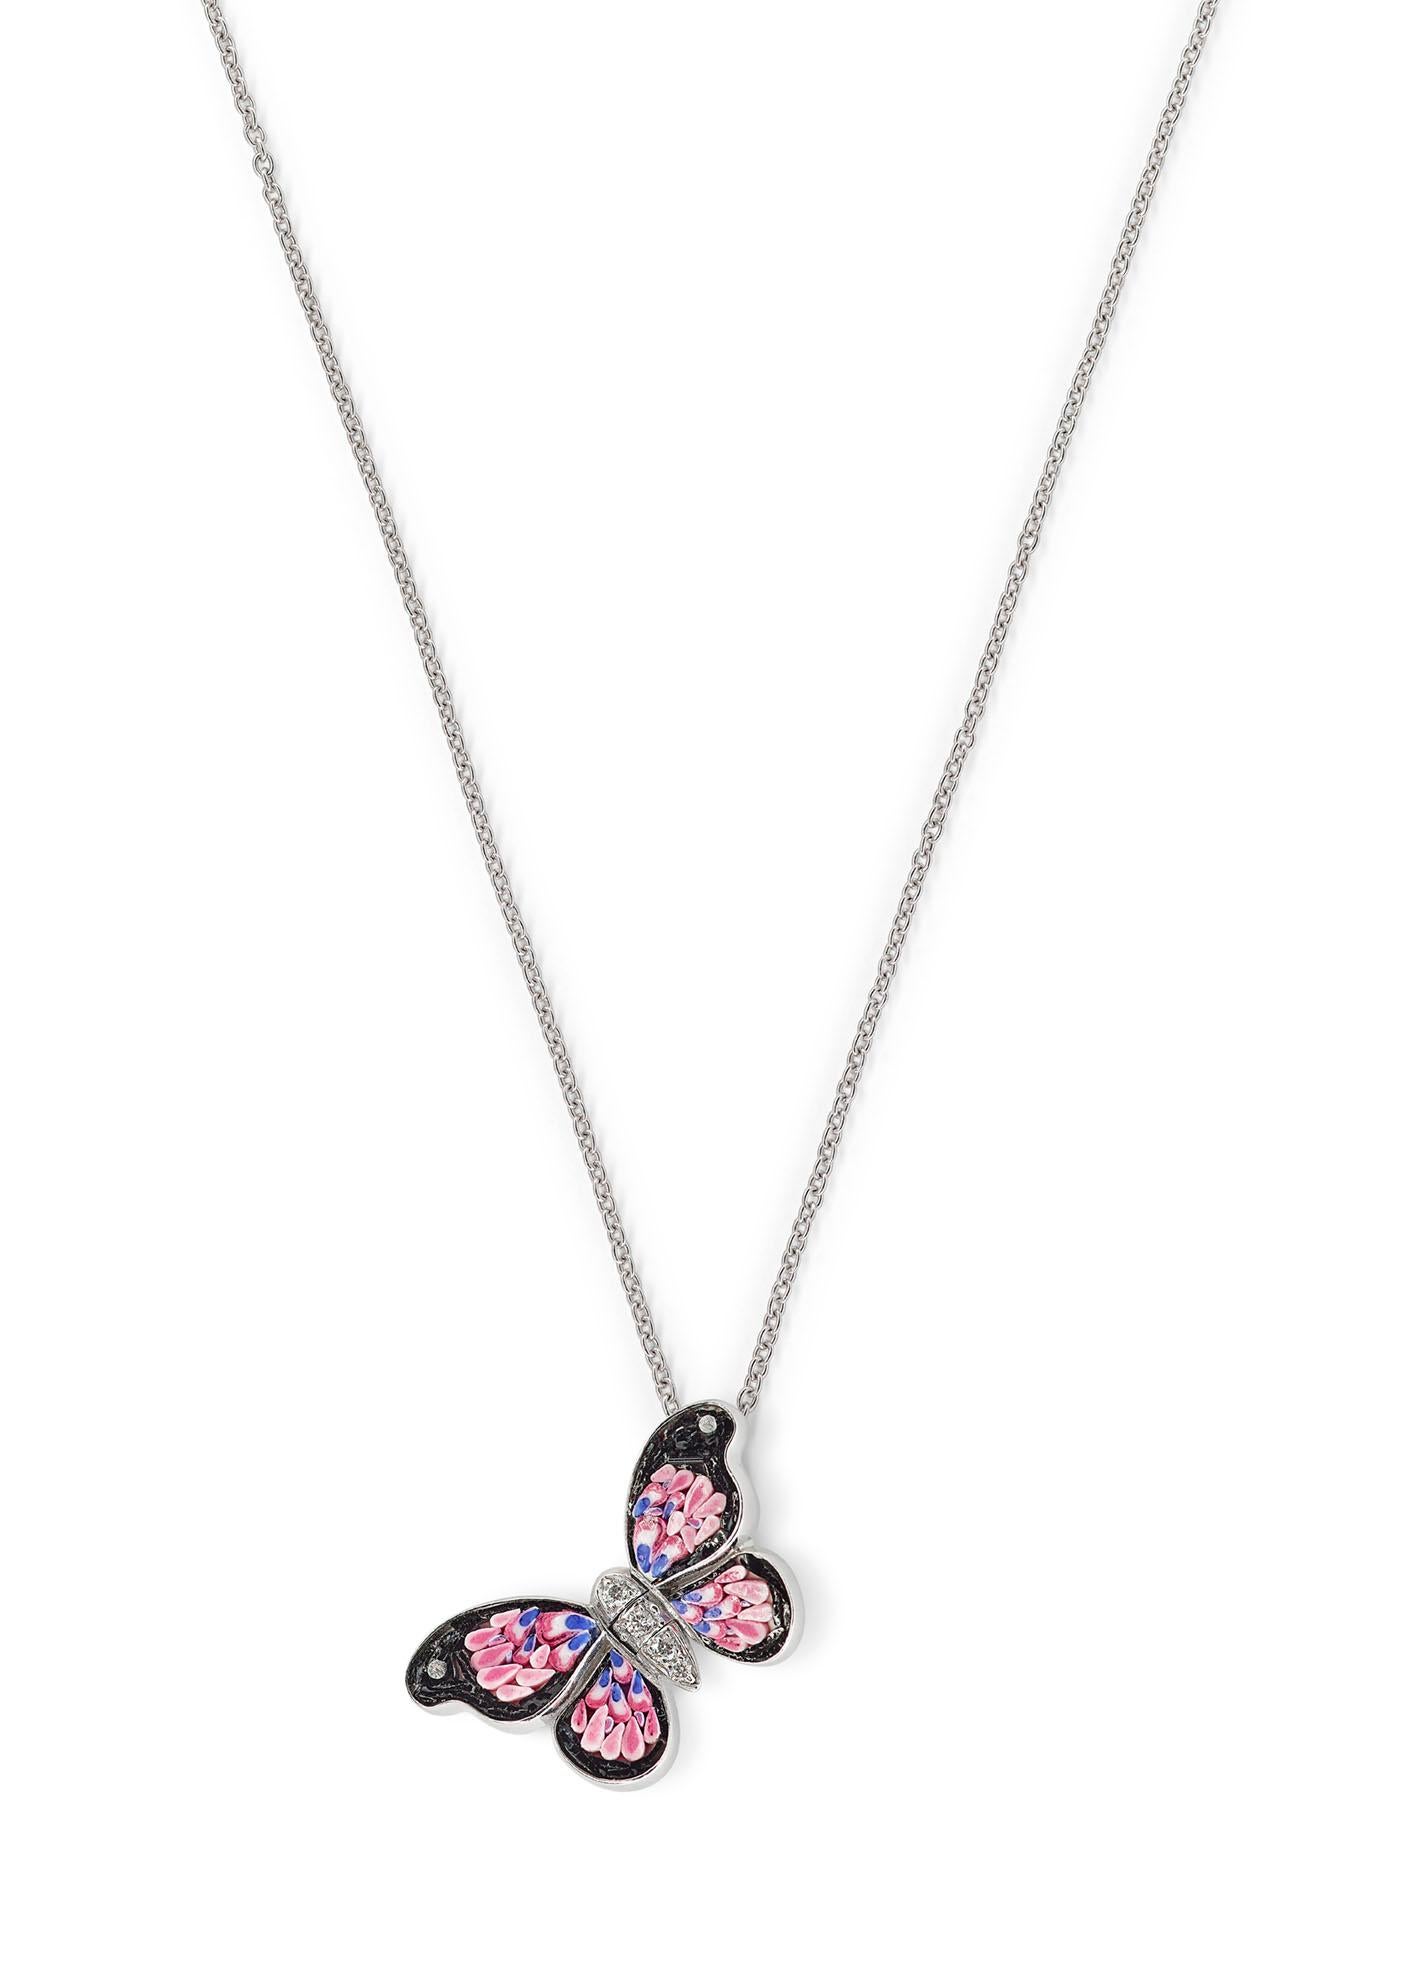 Romantic Stylish Necklace White Gold White Diamonds Hand Decorated with Micro Mosaic For Sale